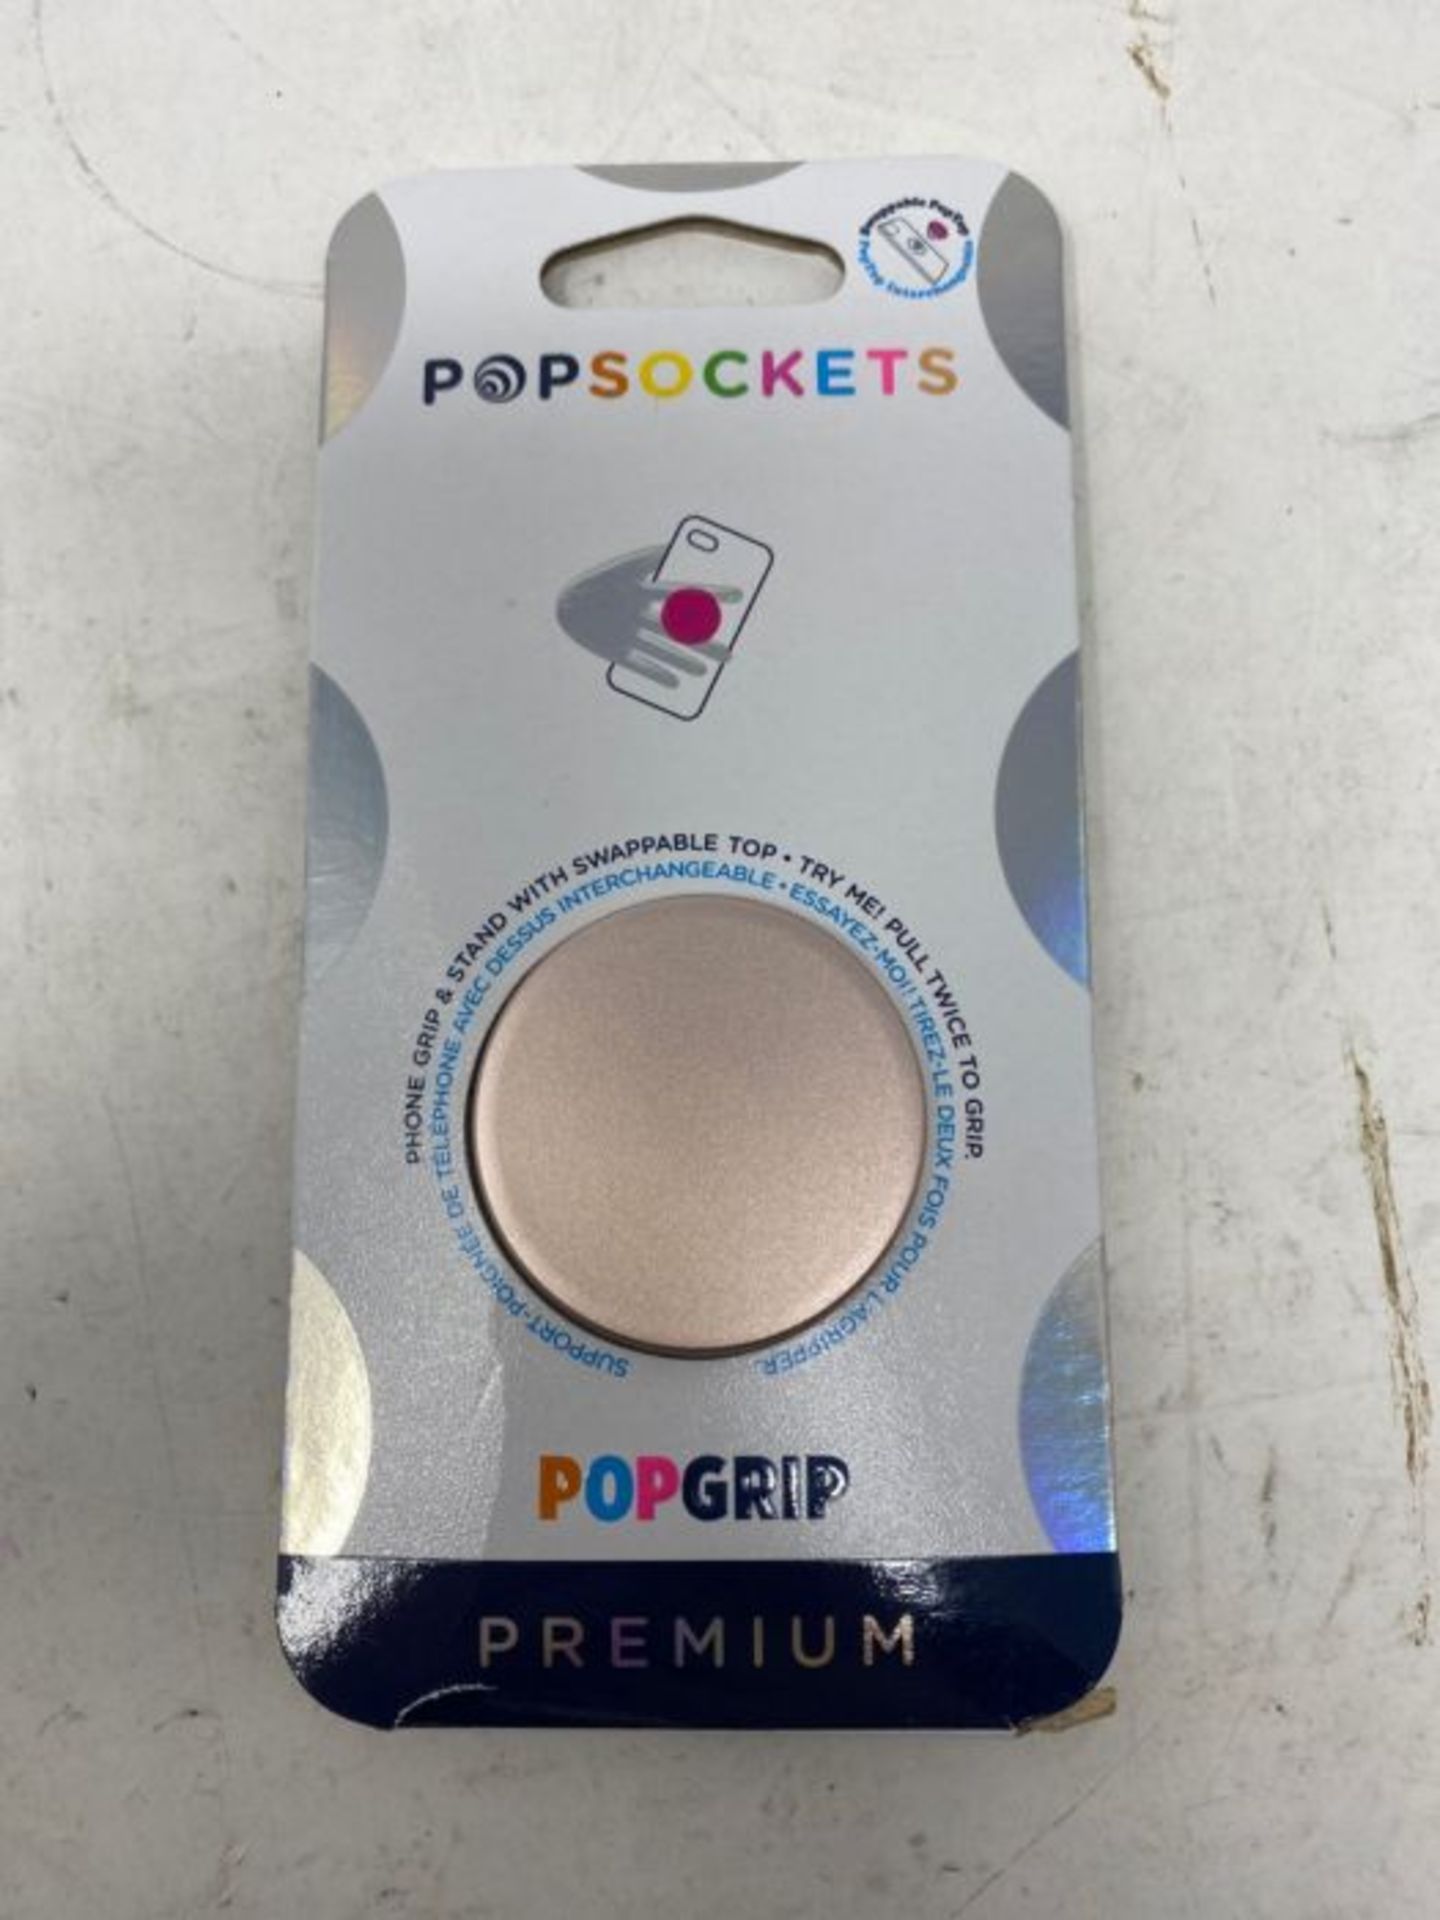 PopSockets: PopGrip Expanding Stand and Grip with a Swappable Top for Phones & Tablets - Image 2 of 3